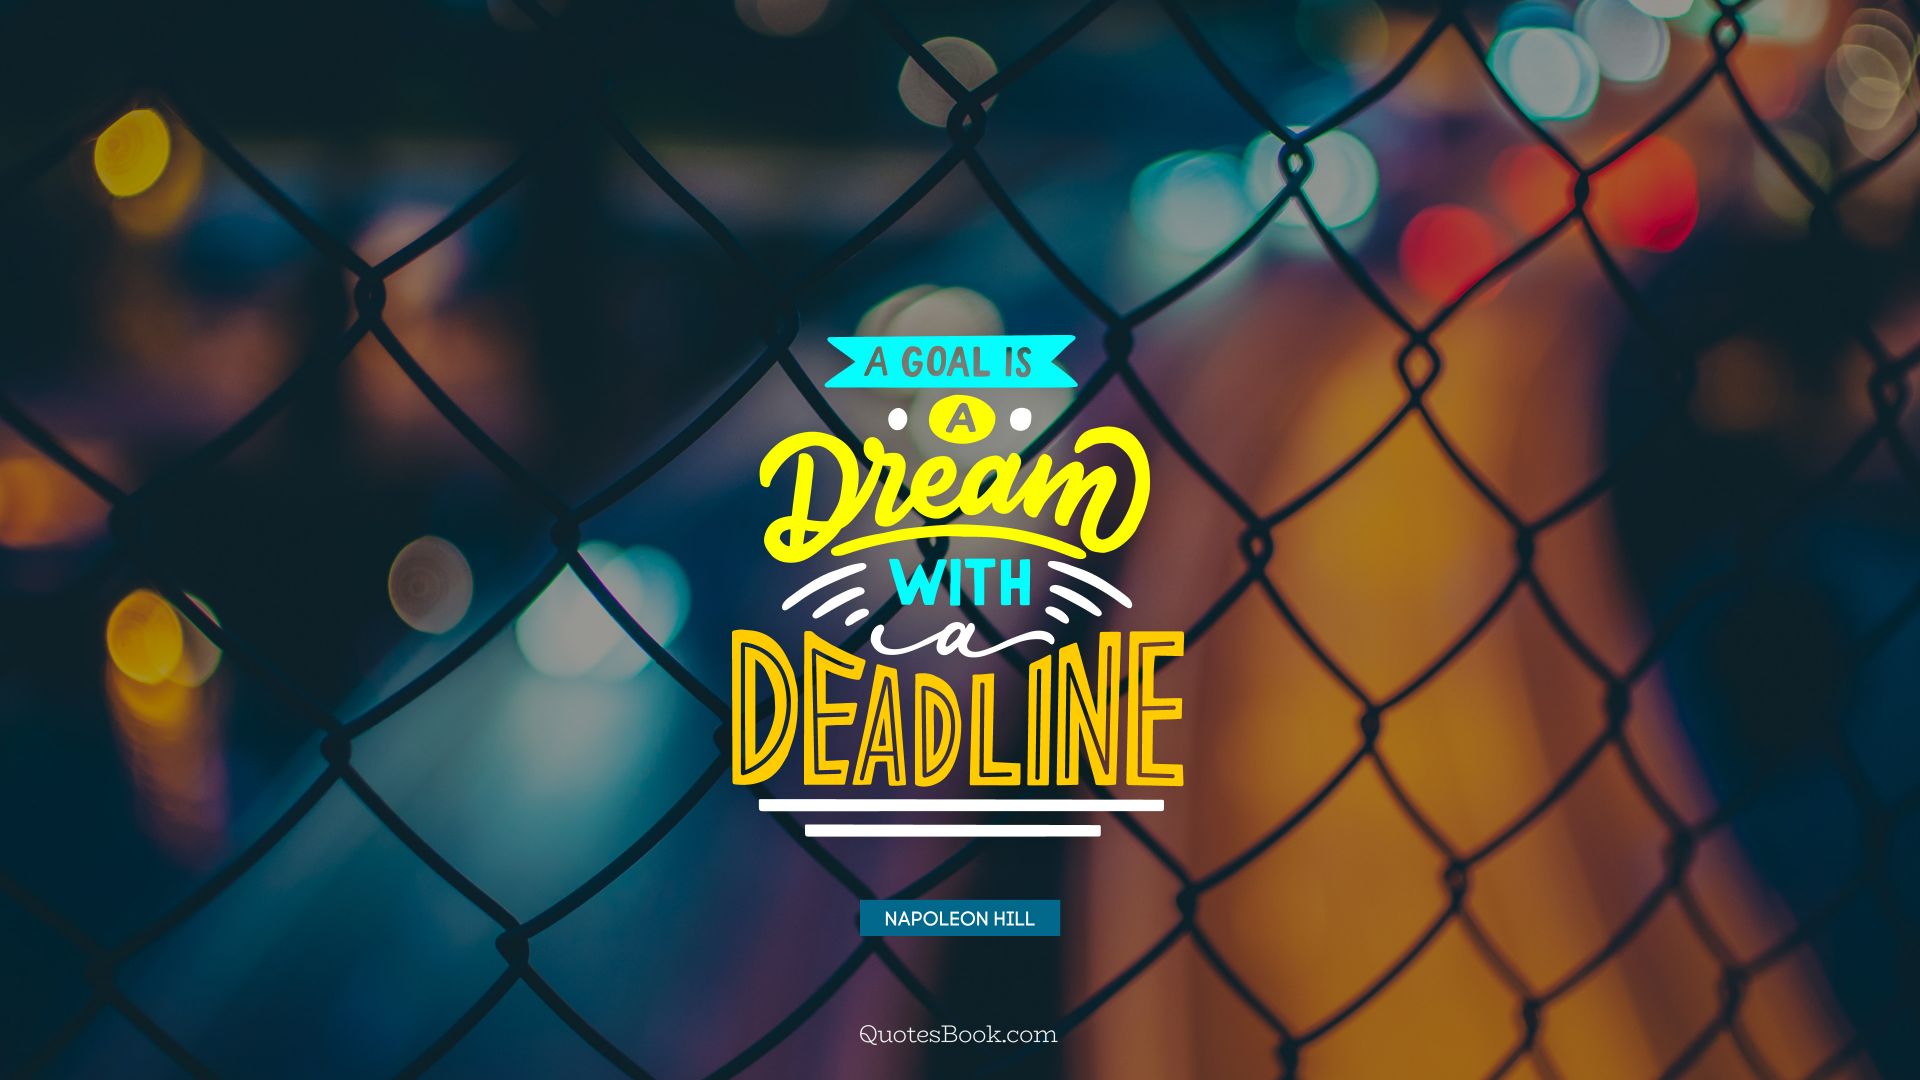 A goal is a dream with a deadline. - Quote by Napoleon Hill